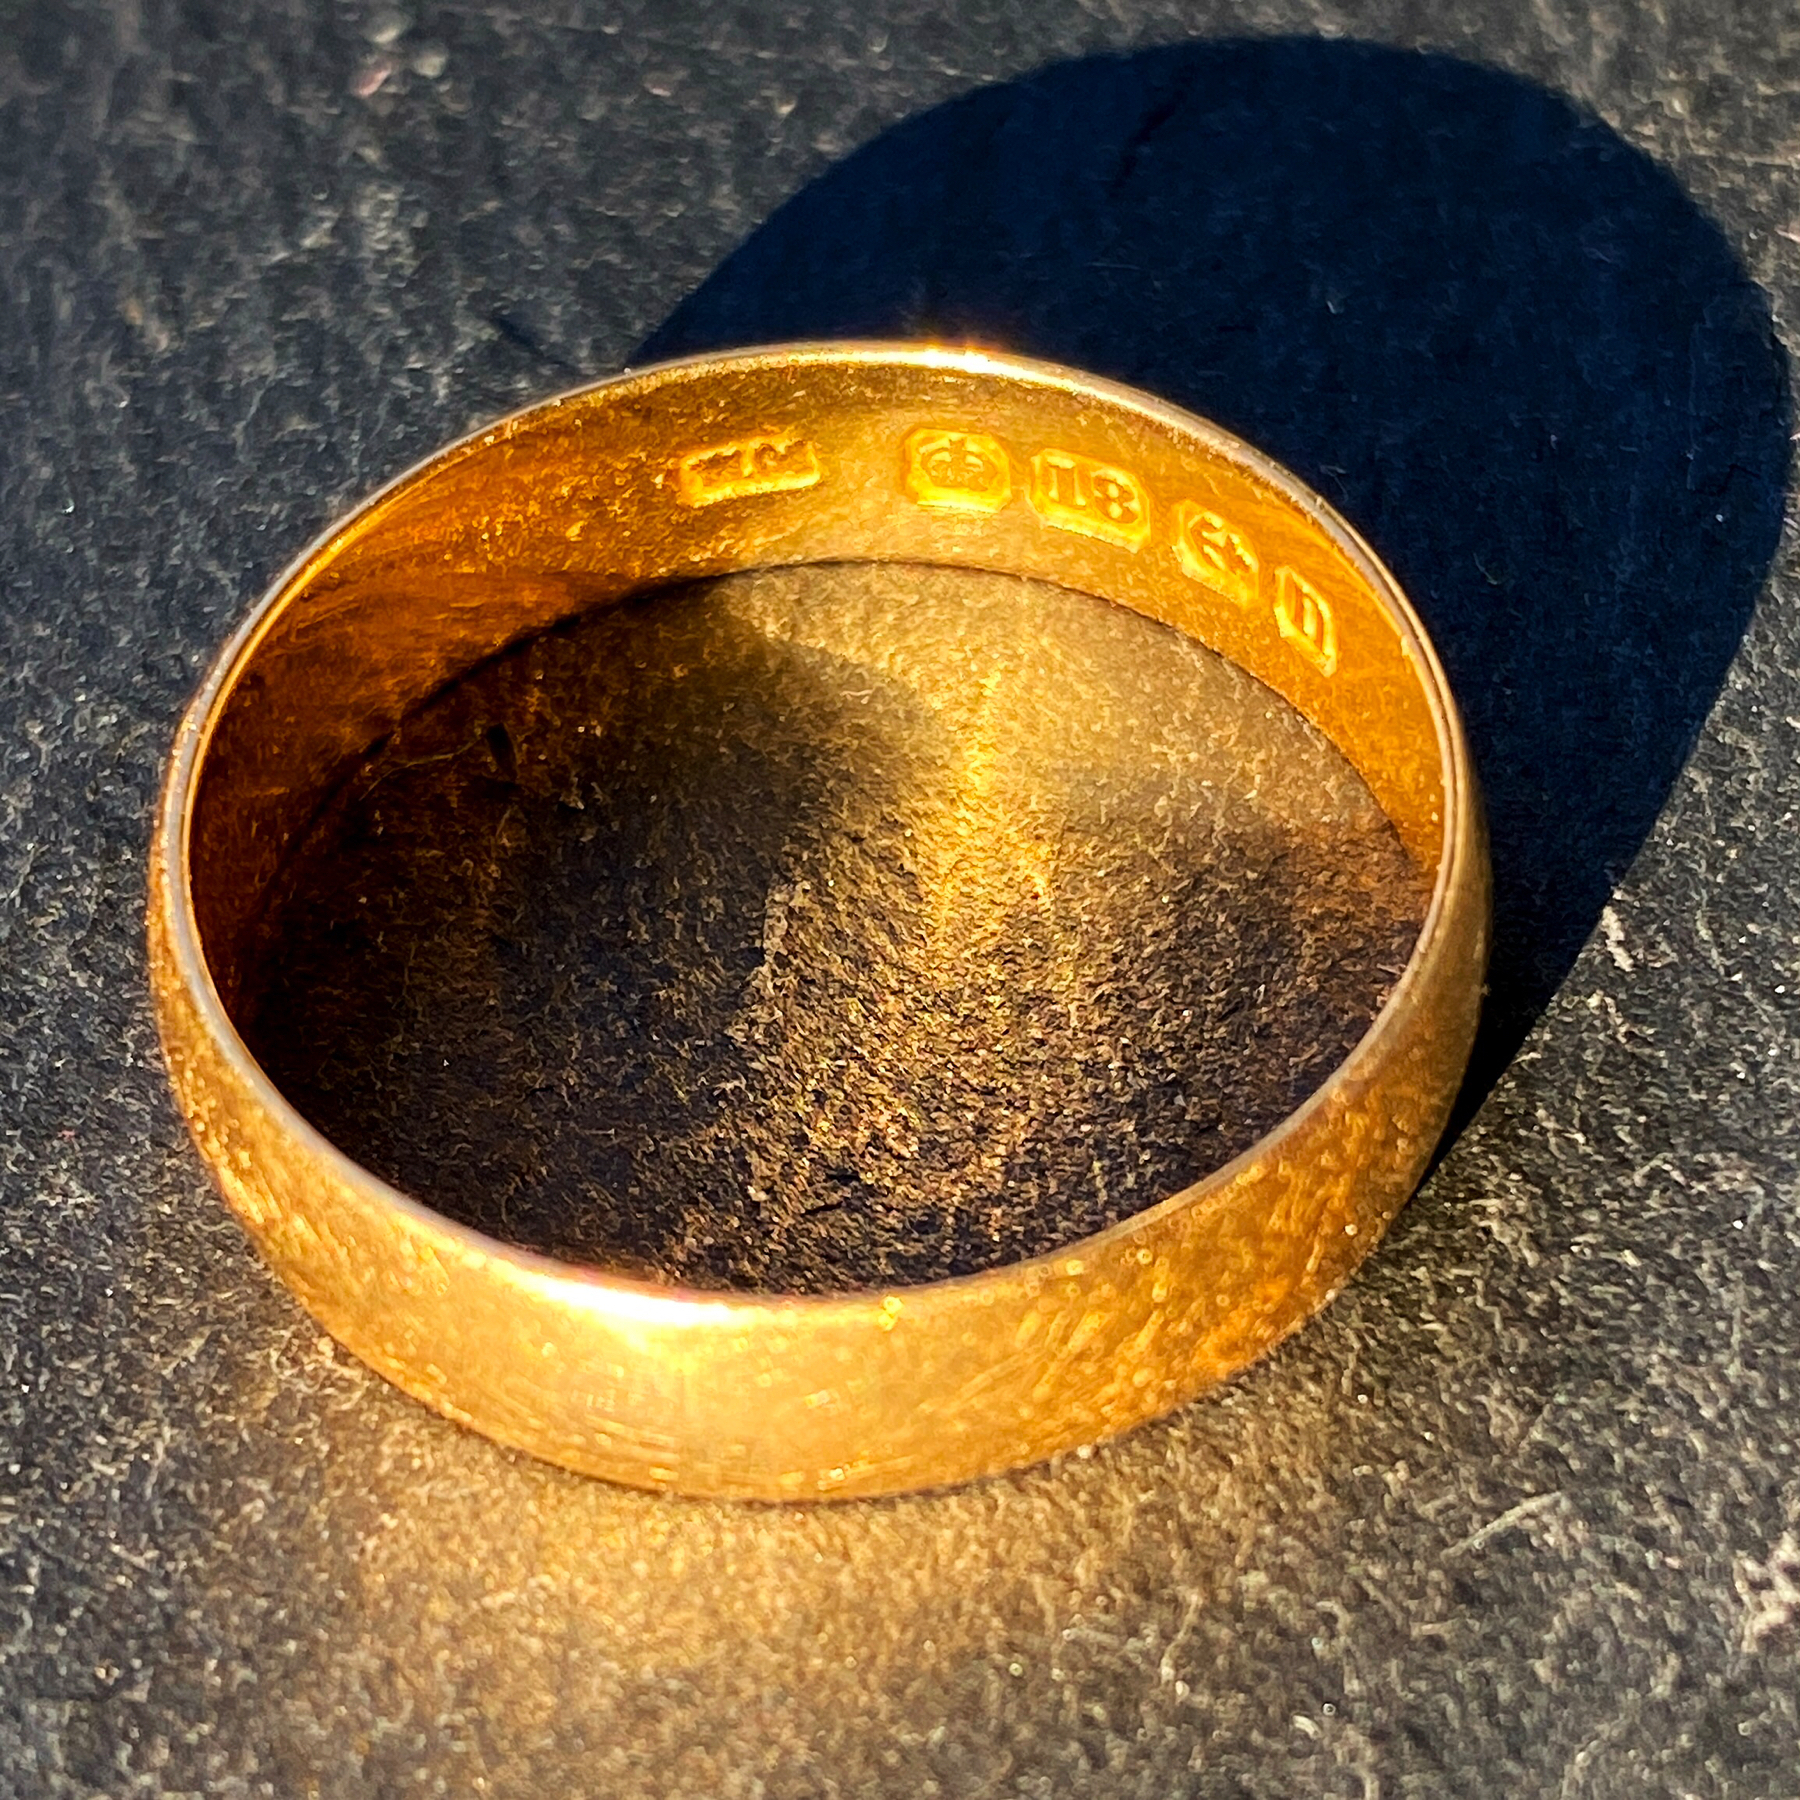 Macro photo of a gold ring on grey stone, sunlight shining on it causing reflection and shadow